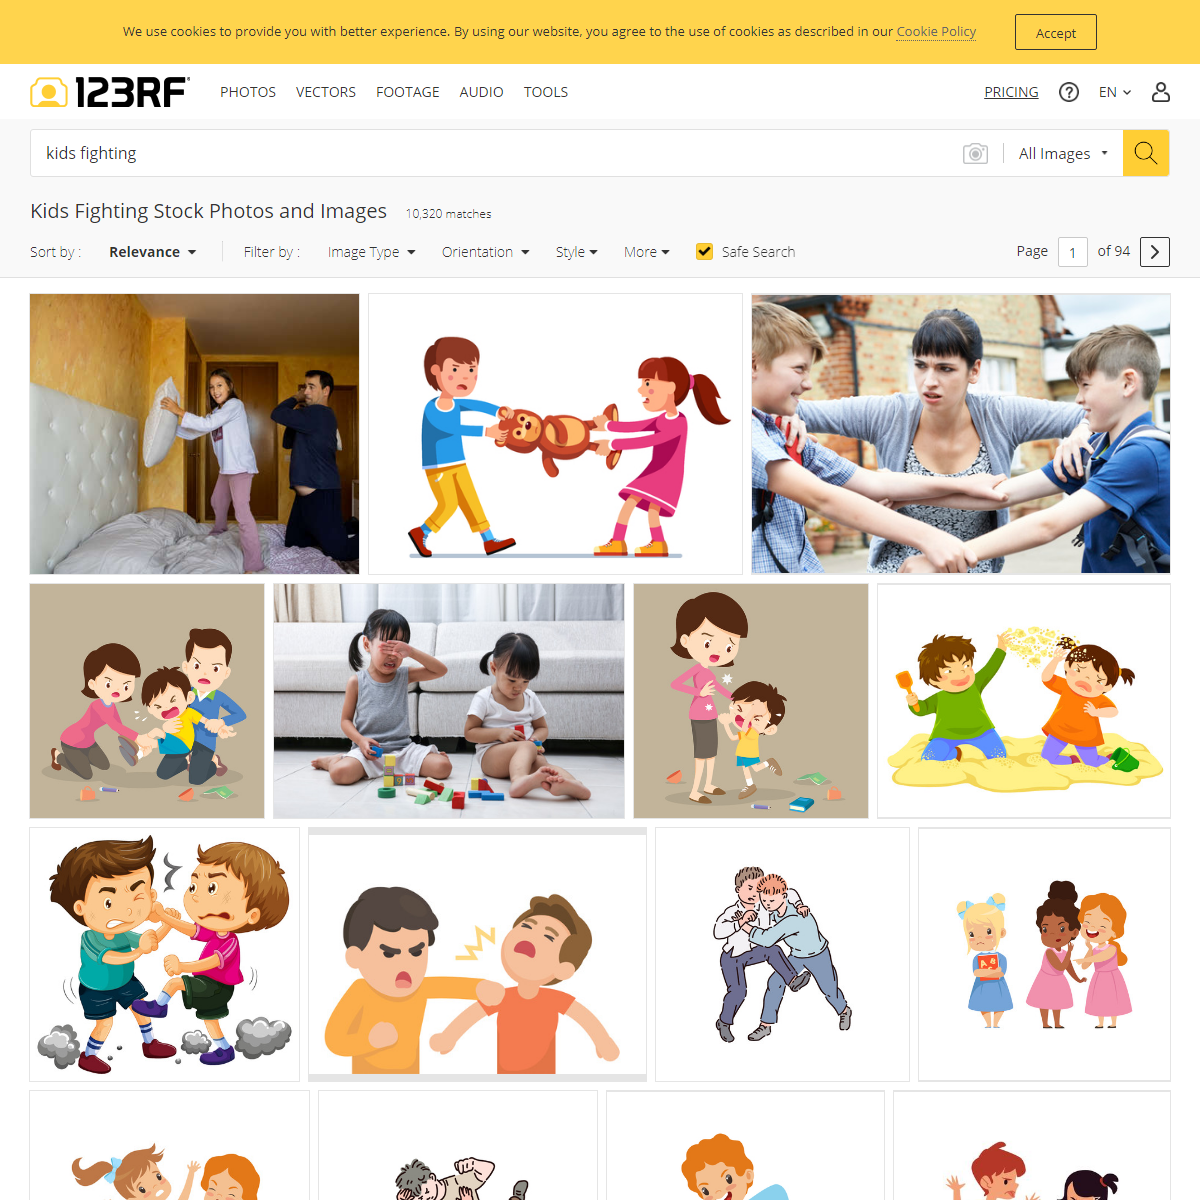 A complete backup of https://www.123rf.com/stock-photo/kids_fighting.html